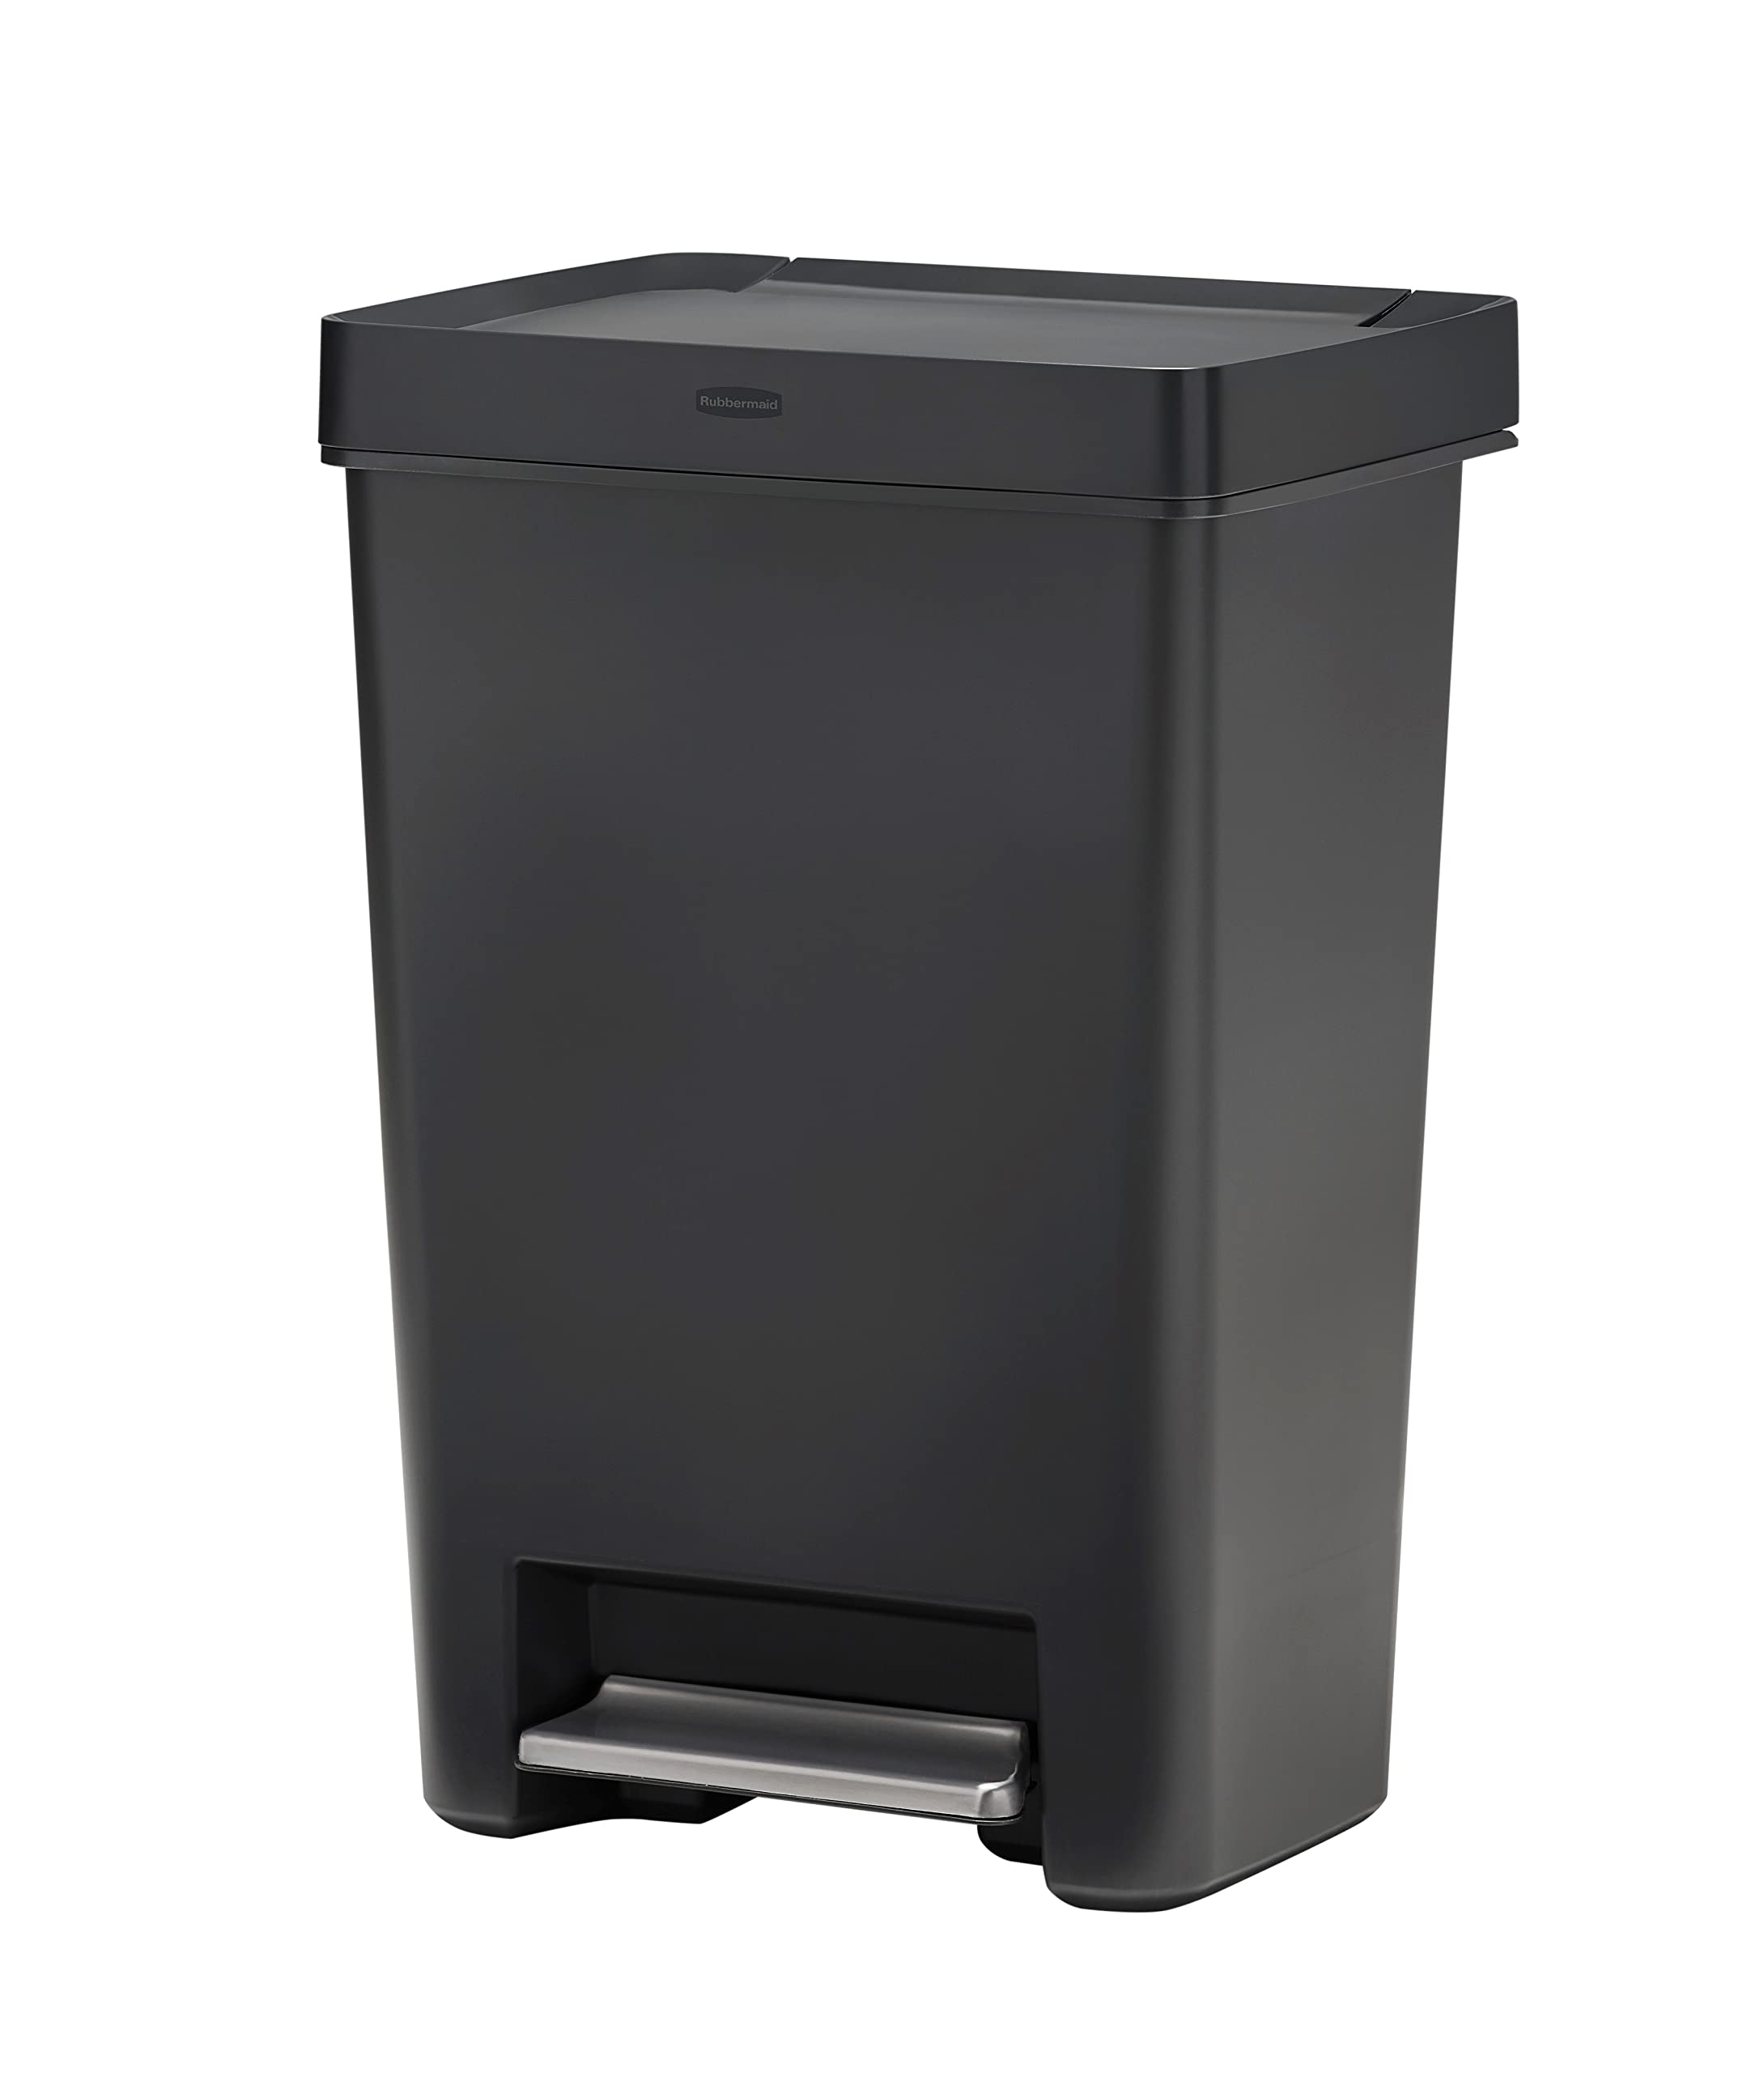 Rubbermaid Step-On Lid Trash Can for Home, Kitchen, and...